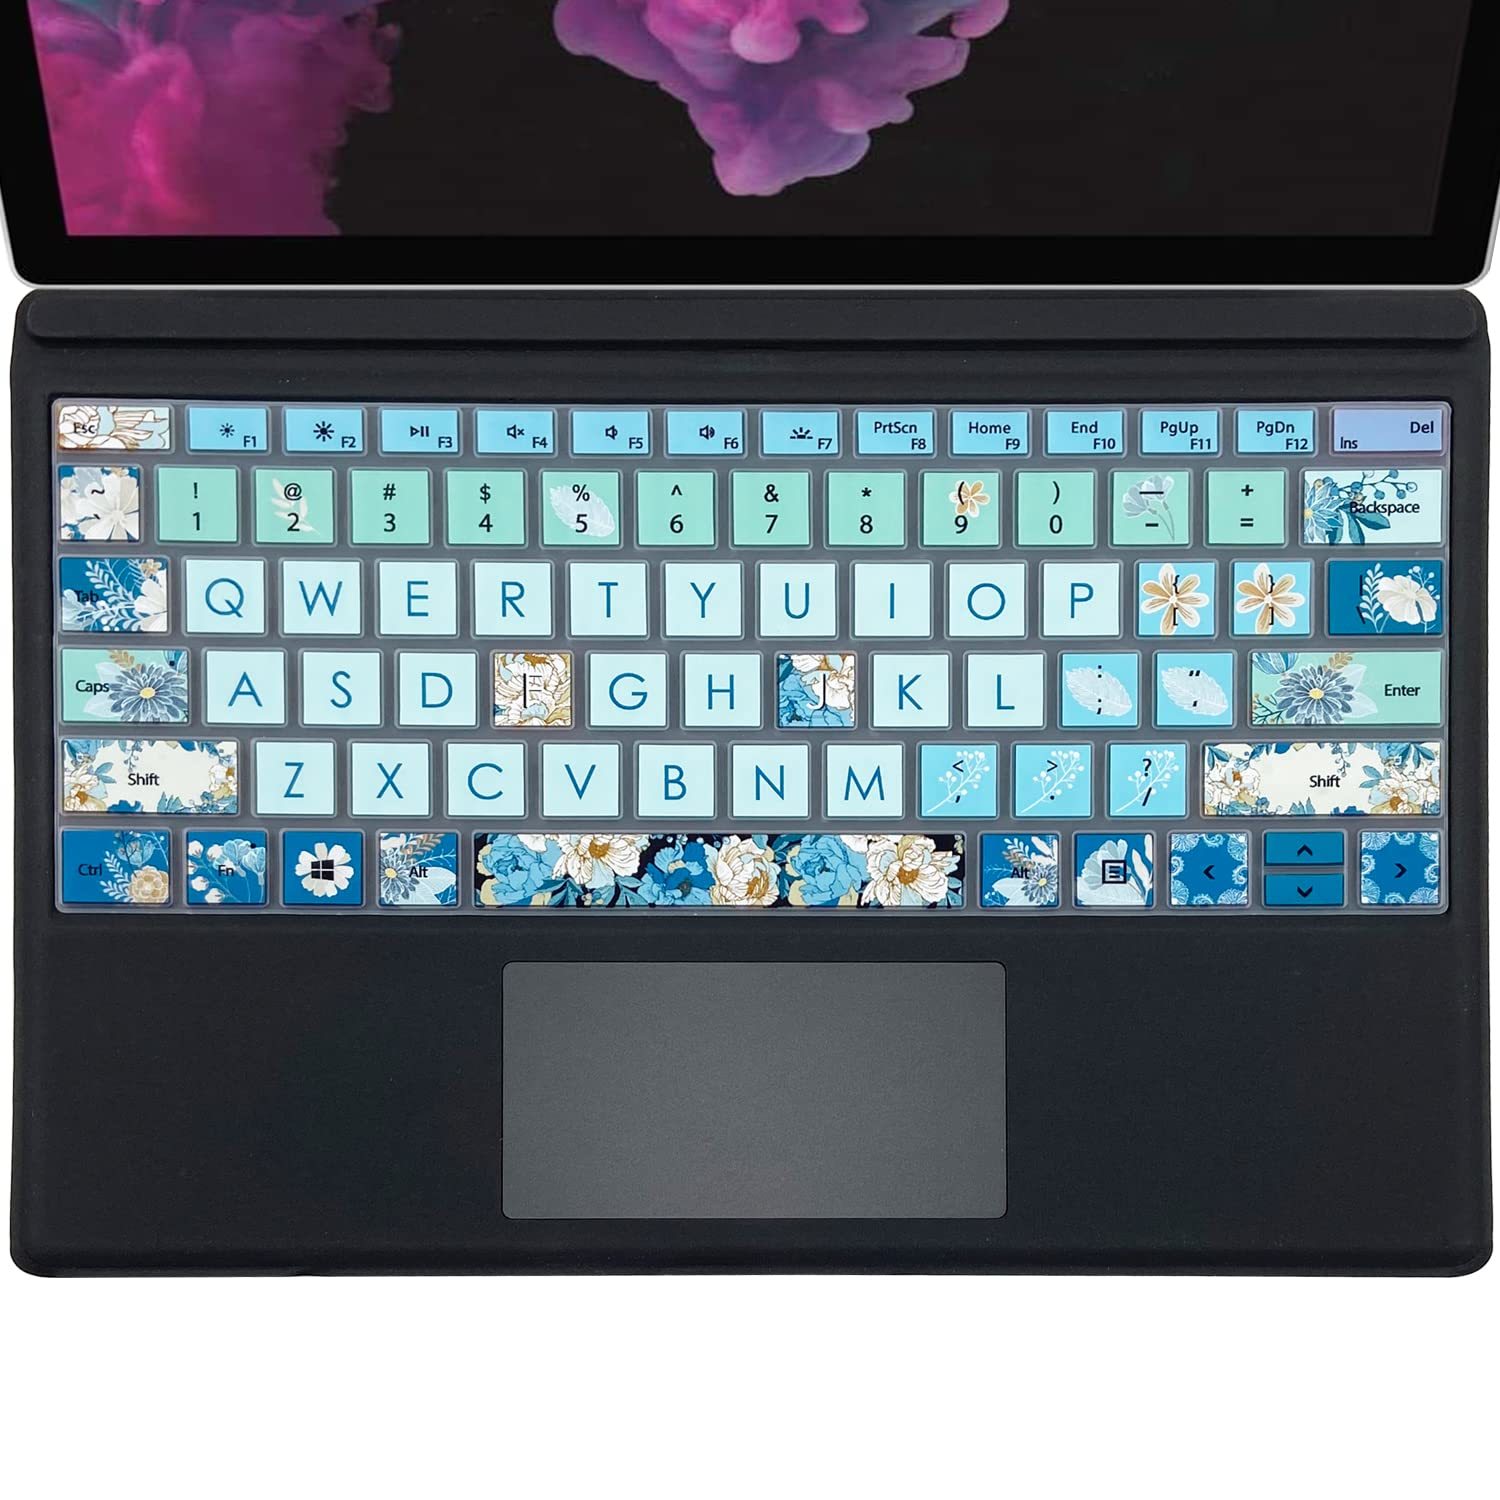 Silicon Keyboard Cover Skin For Microsoft Surface Pro 7 2019/Surface Pro 6 2018/ - $17.99